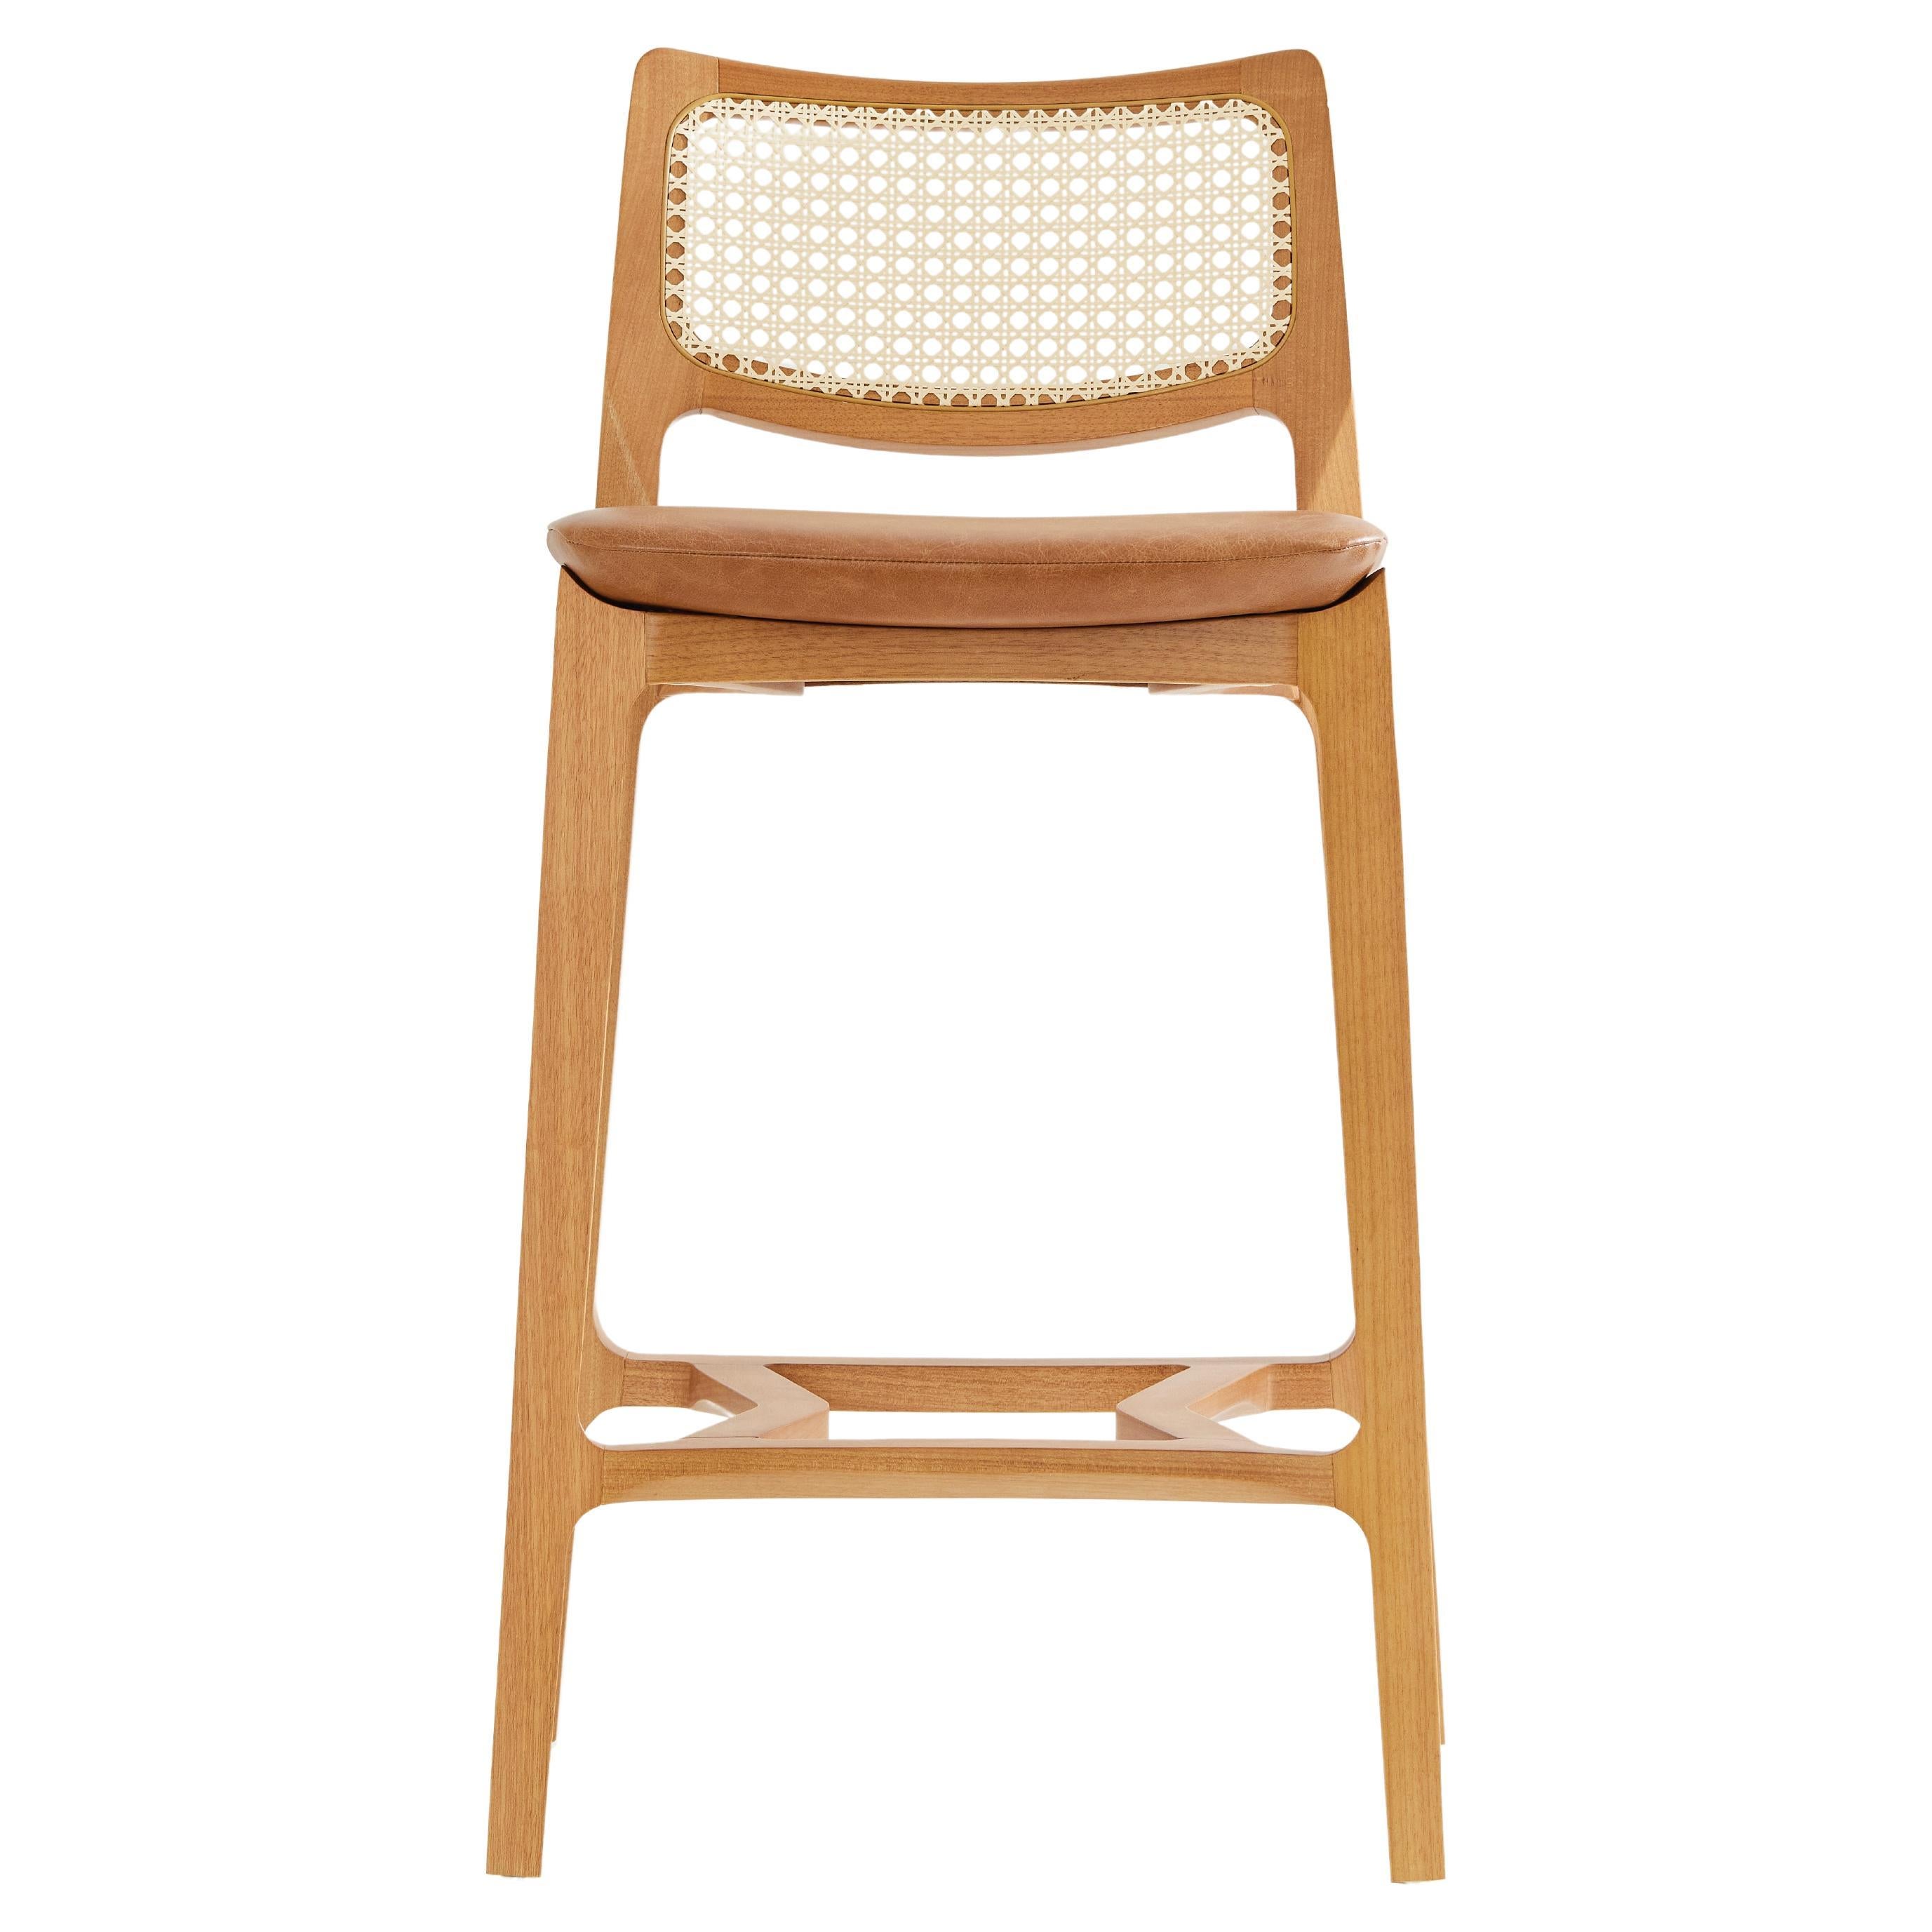 Aurora stool, light honey solid wood, natural caning back, camel leather seating